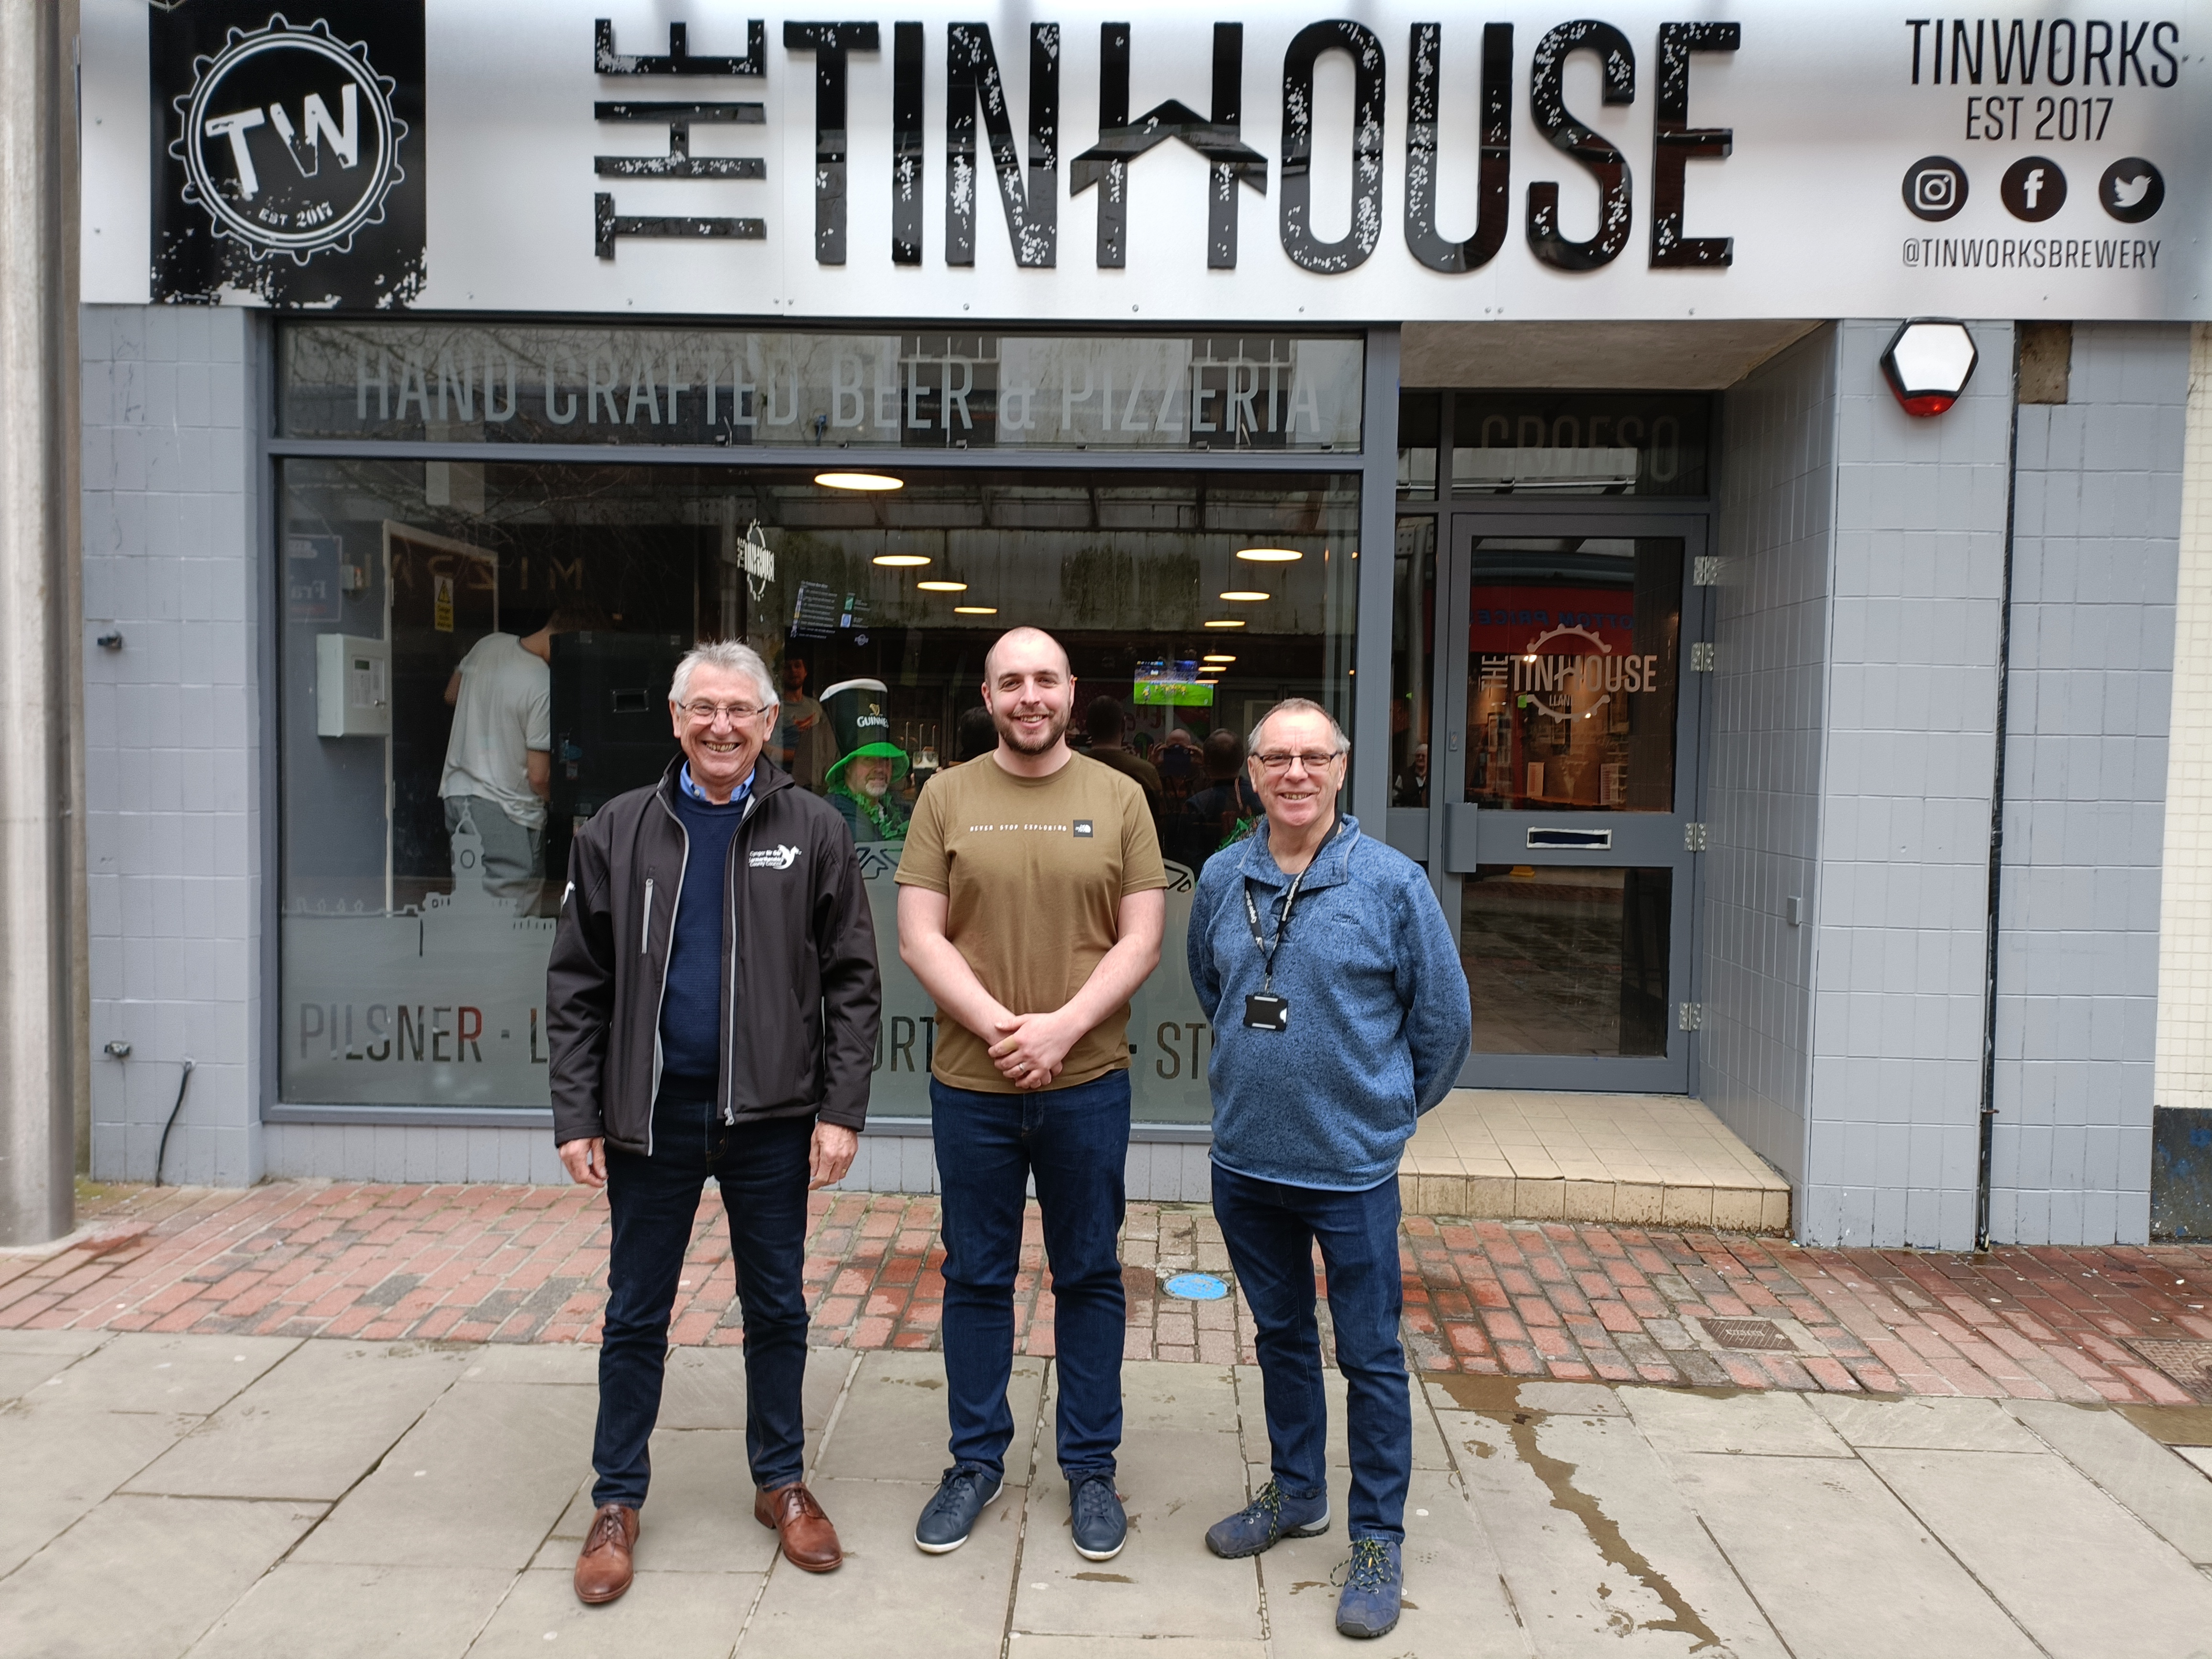 Tinworks Brewery's new Tinhouse in Llanelli